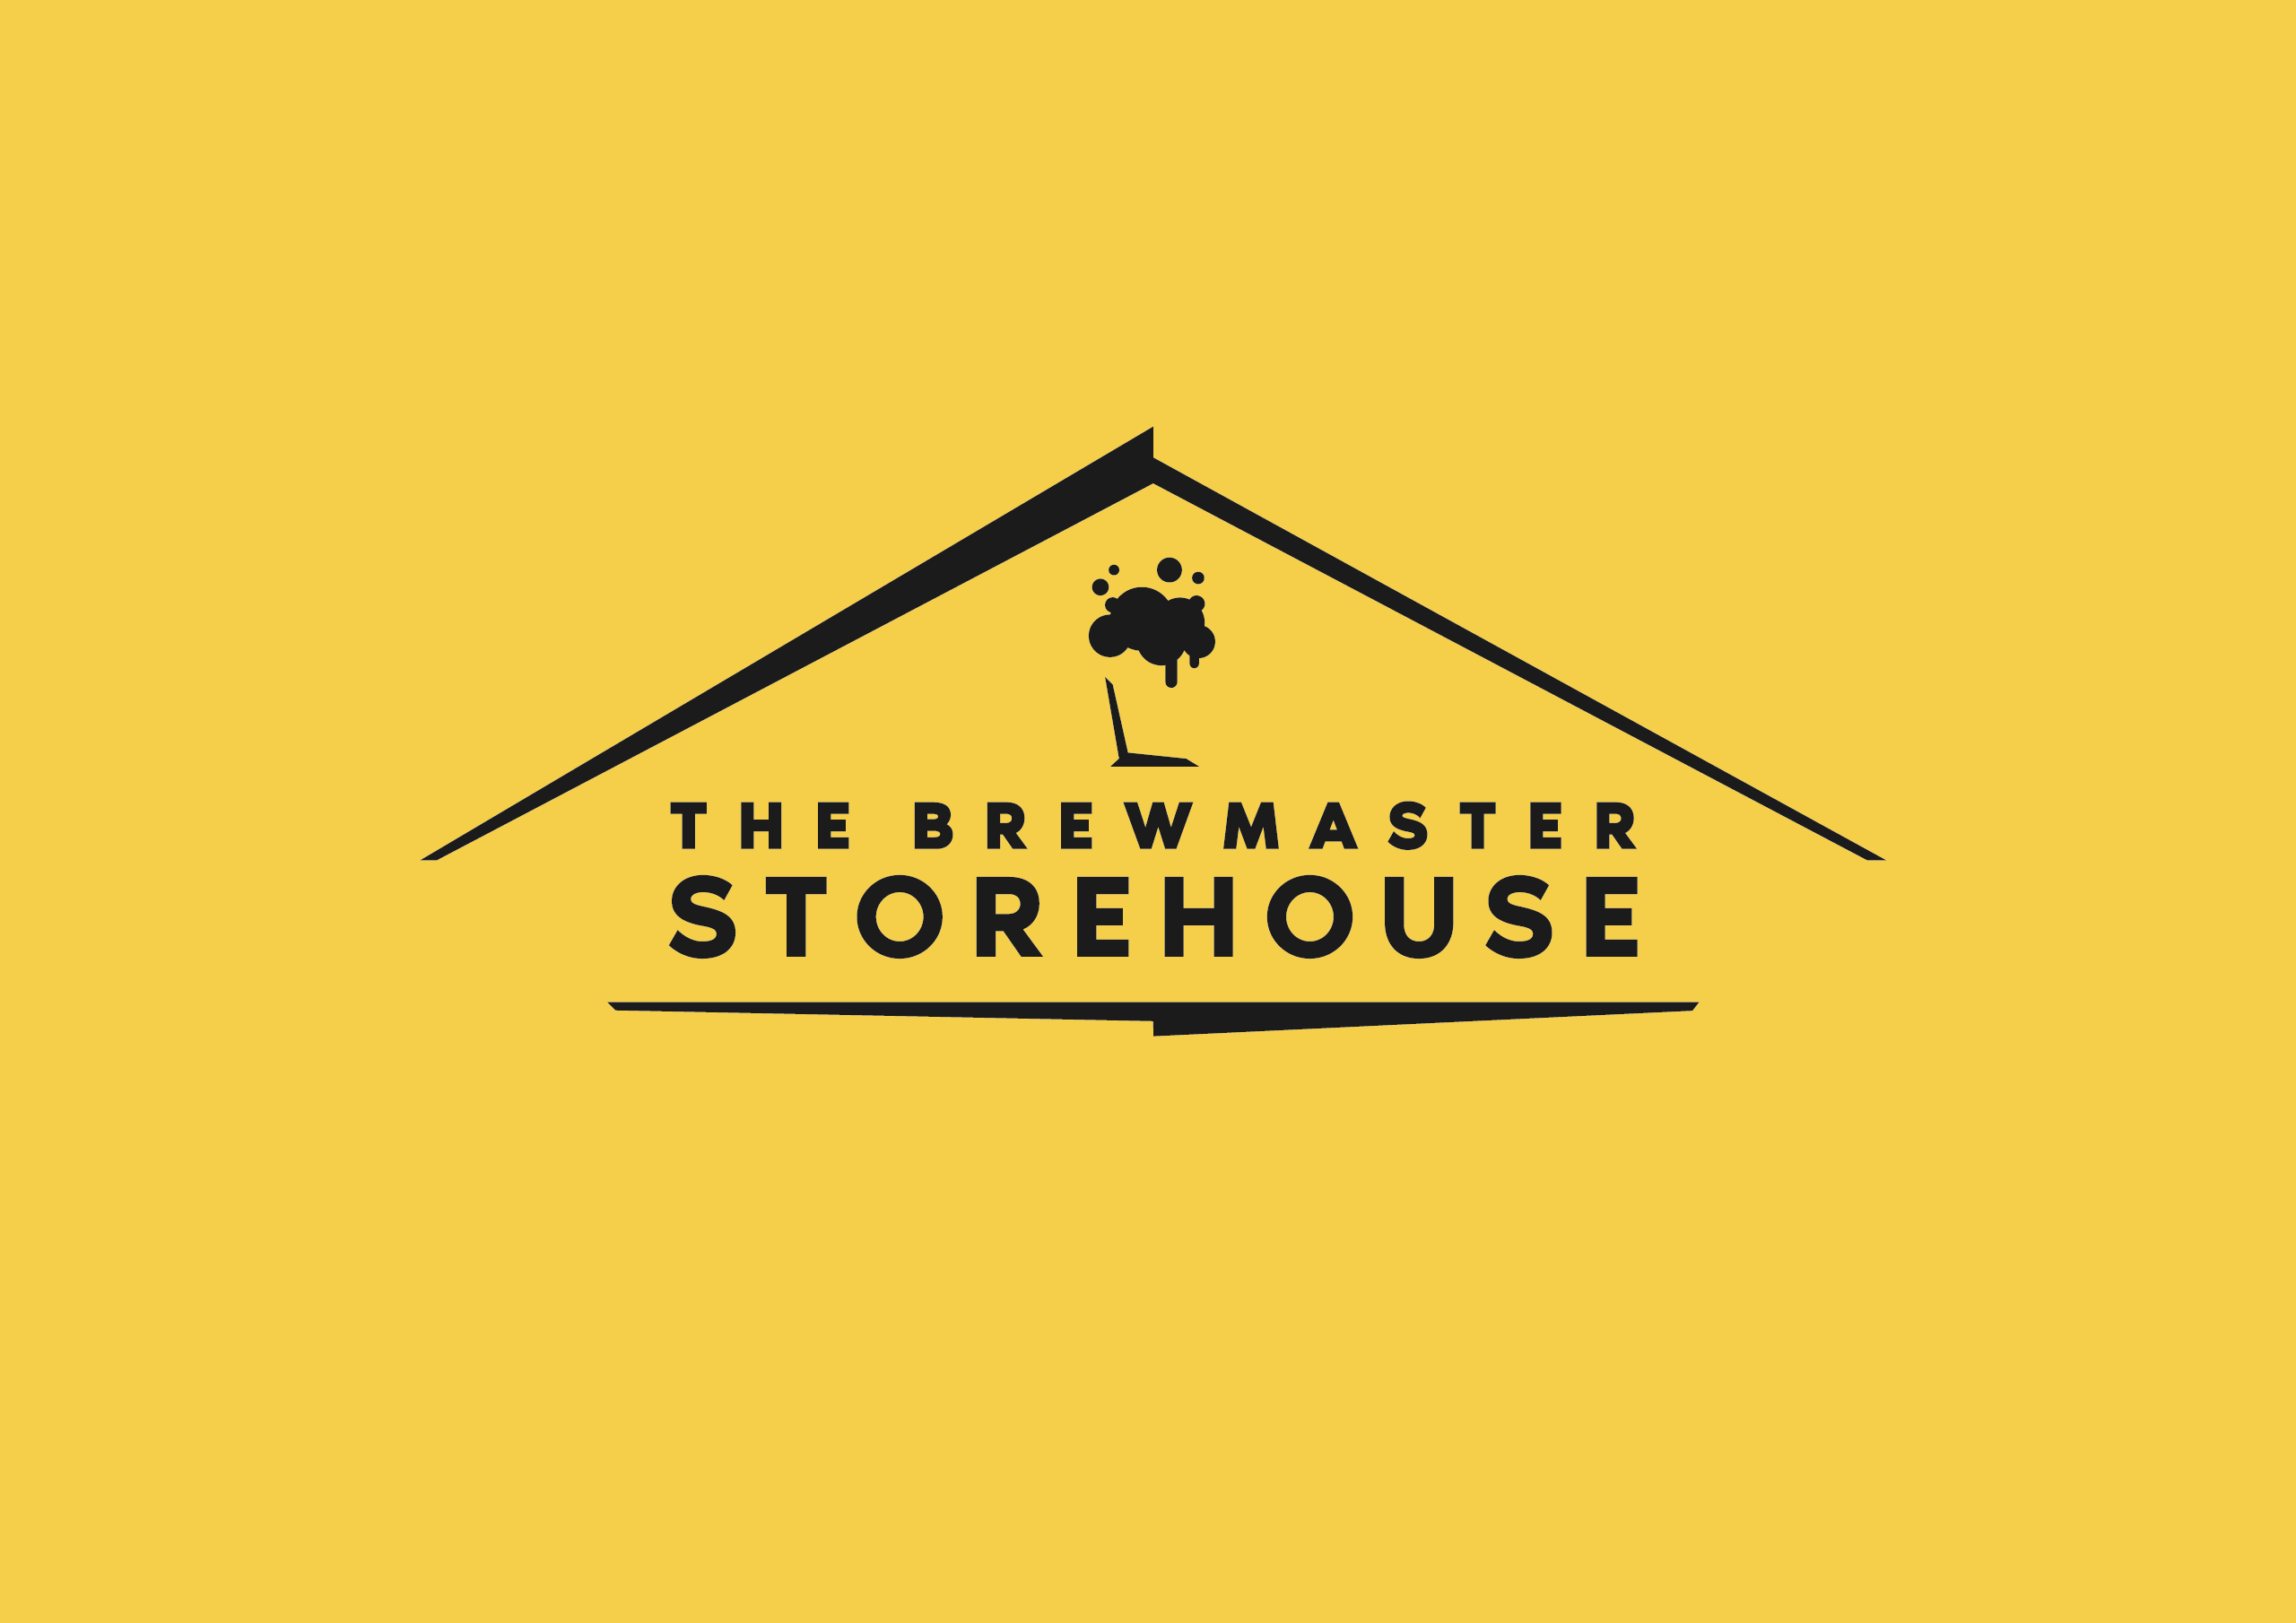 THE BREWMASTER STOREHOUSE ららぽーと福岡店のロゴが描かれた写真